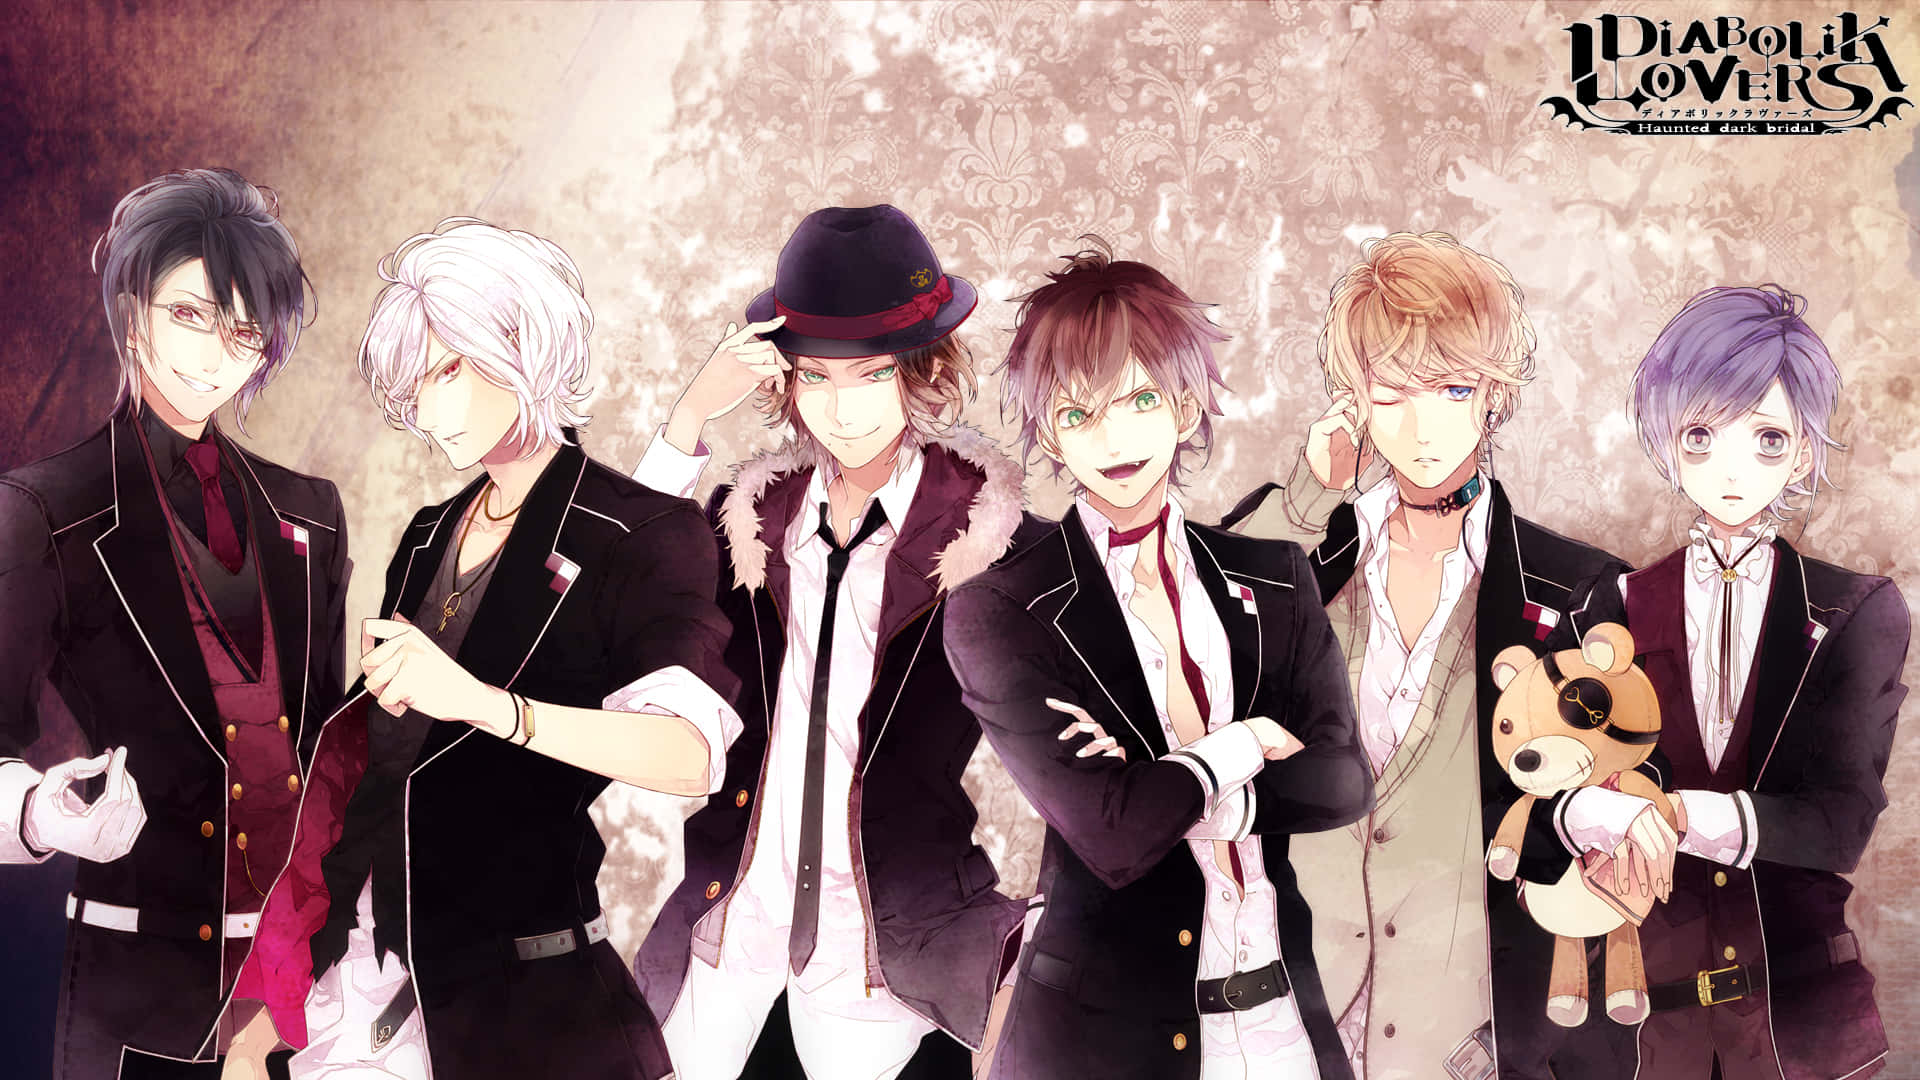 Be mesmerized by the dark and mysterious Diabolik Lovers